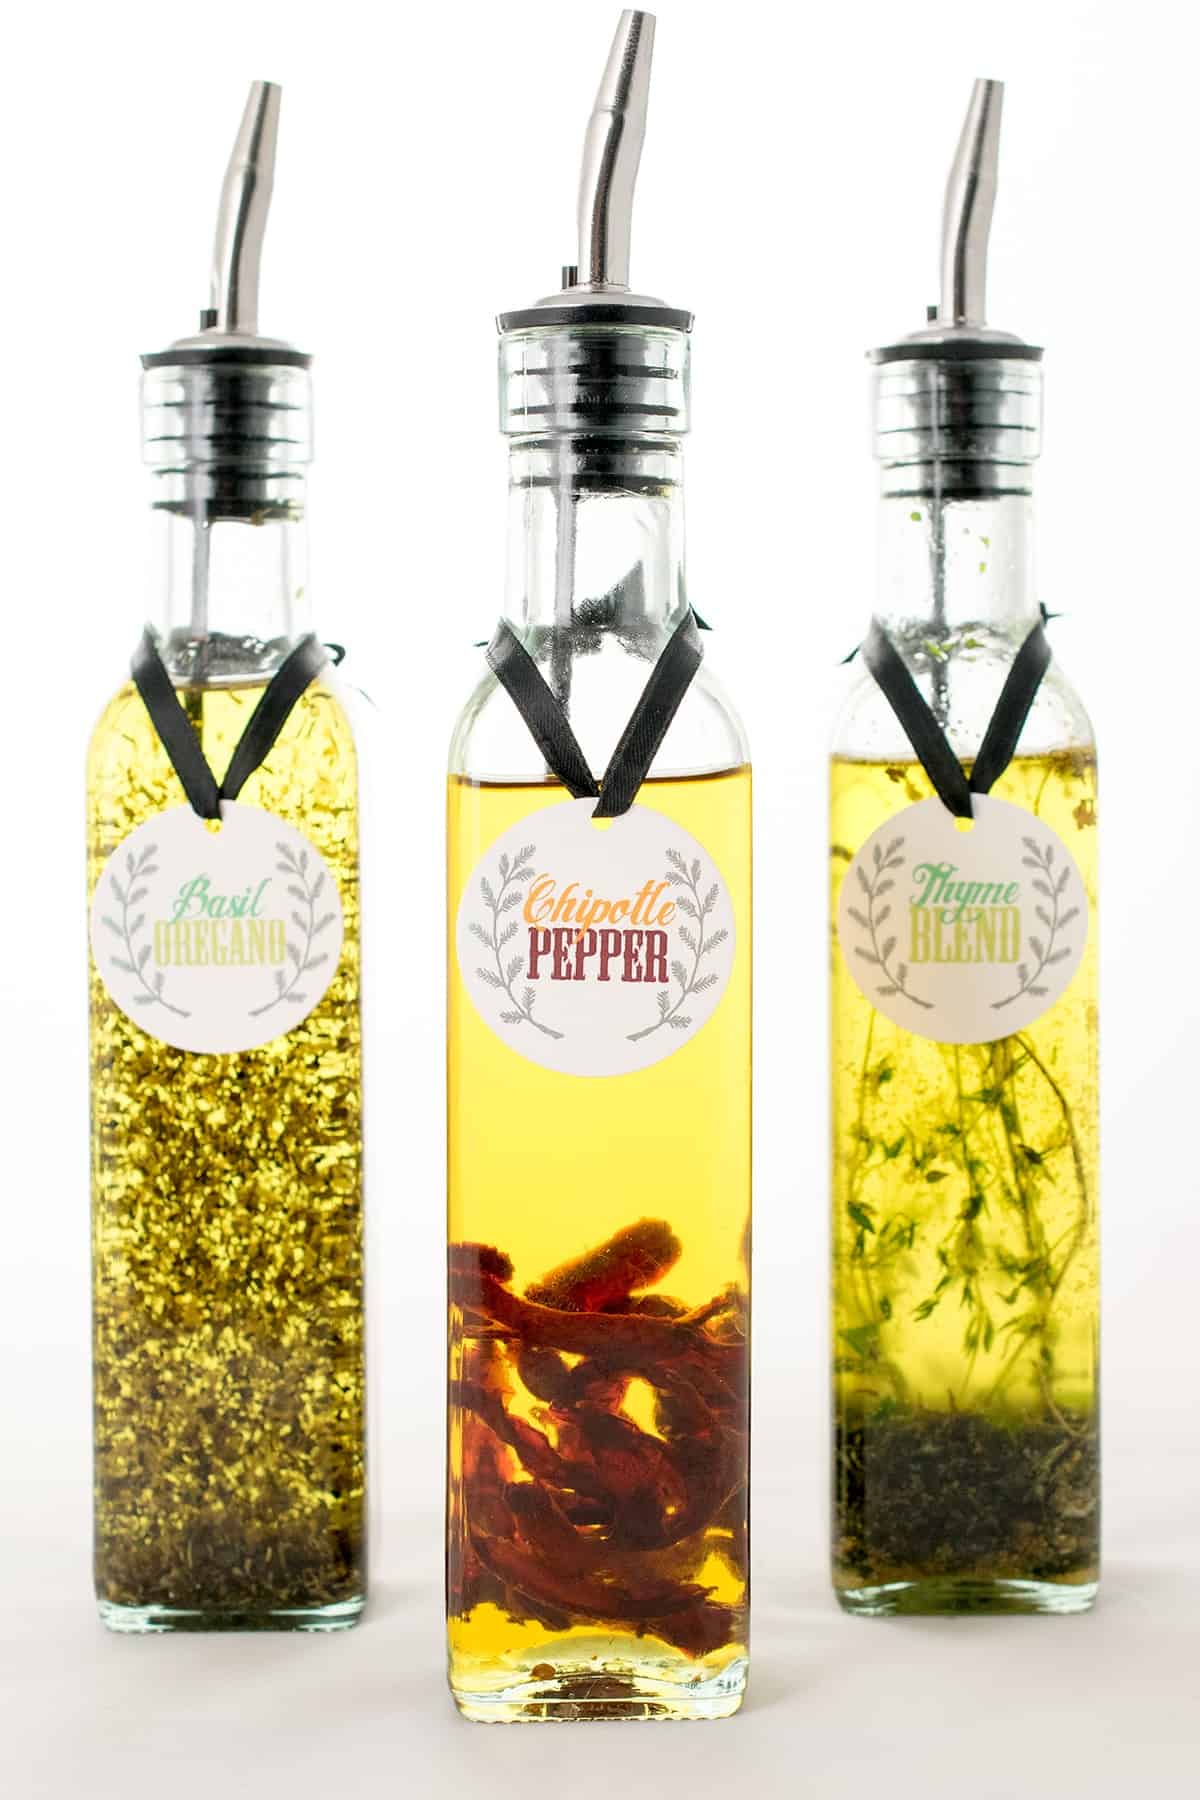 Gifts from your Kitchen - Infused Oils - Craving some Creativity